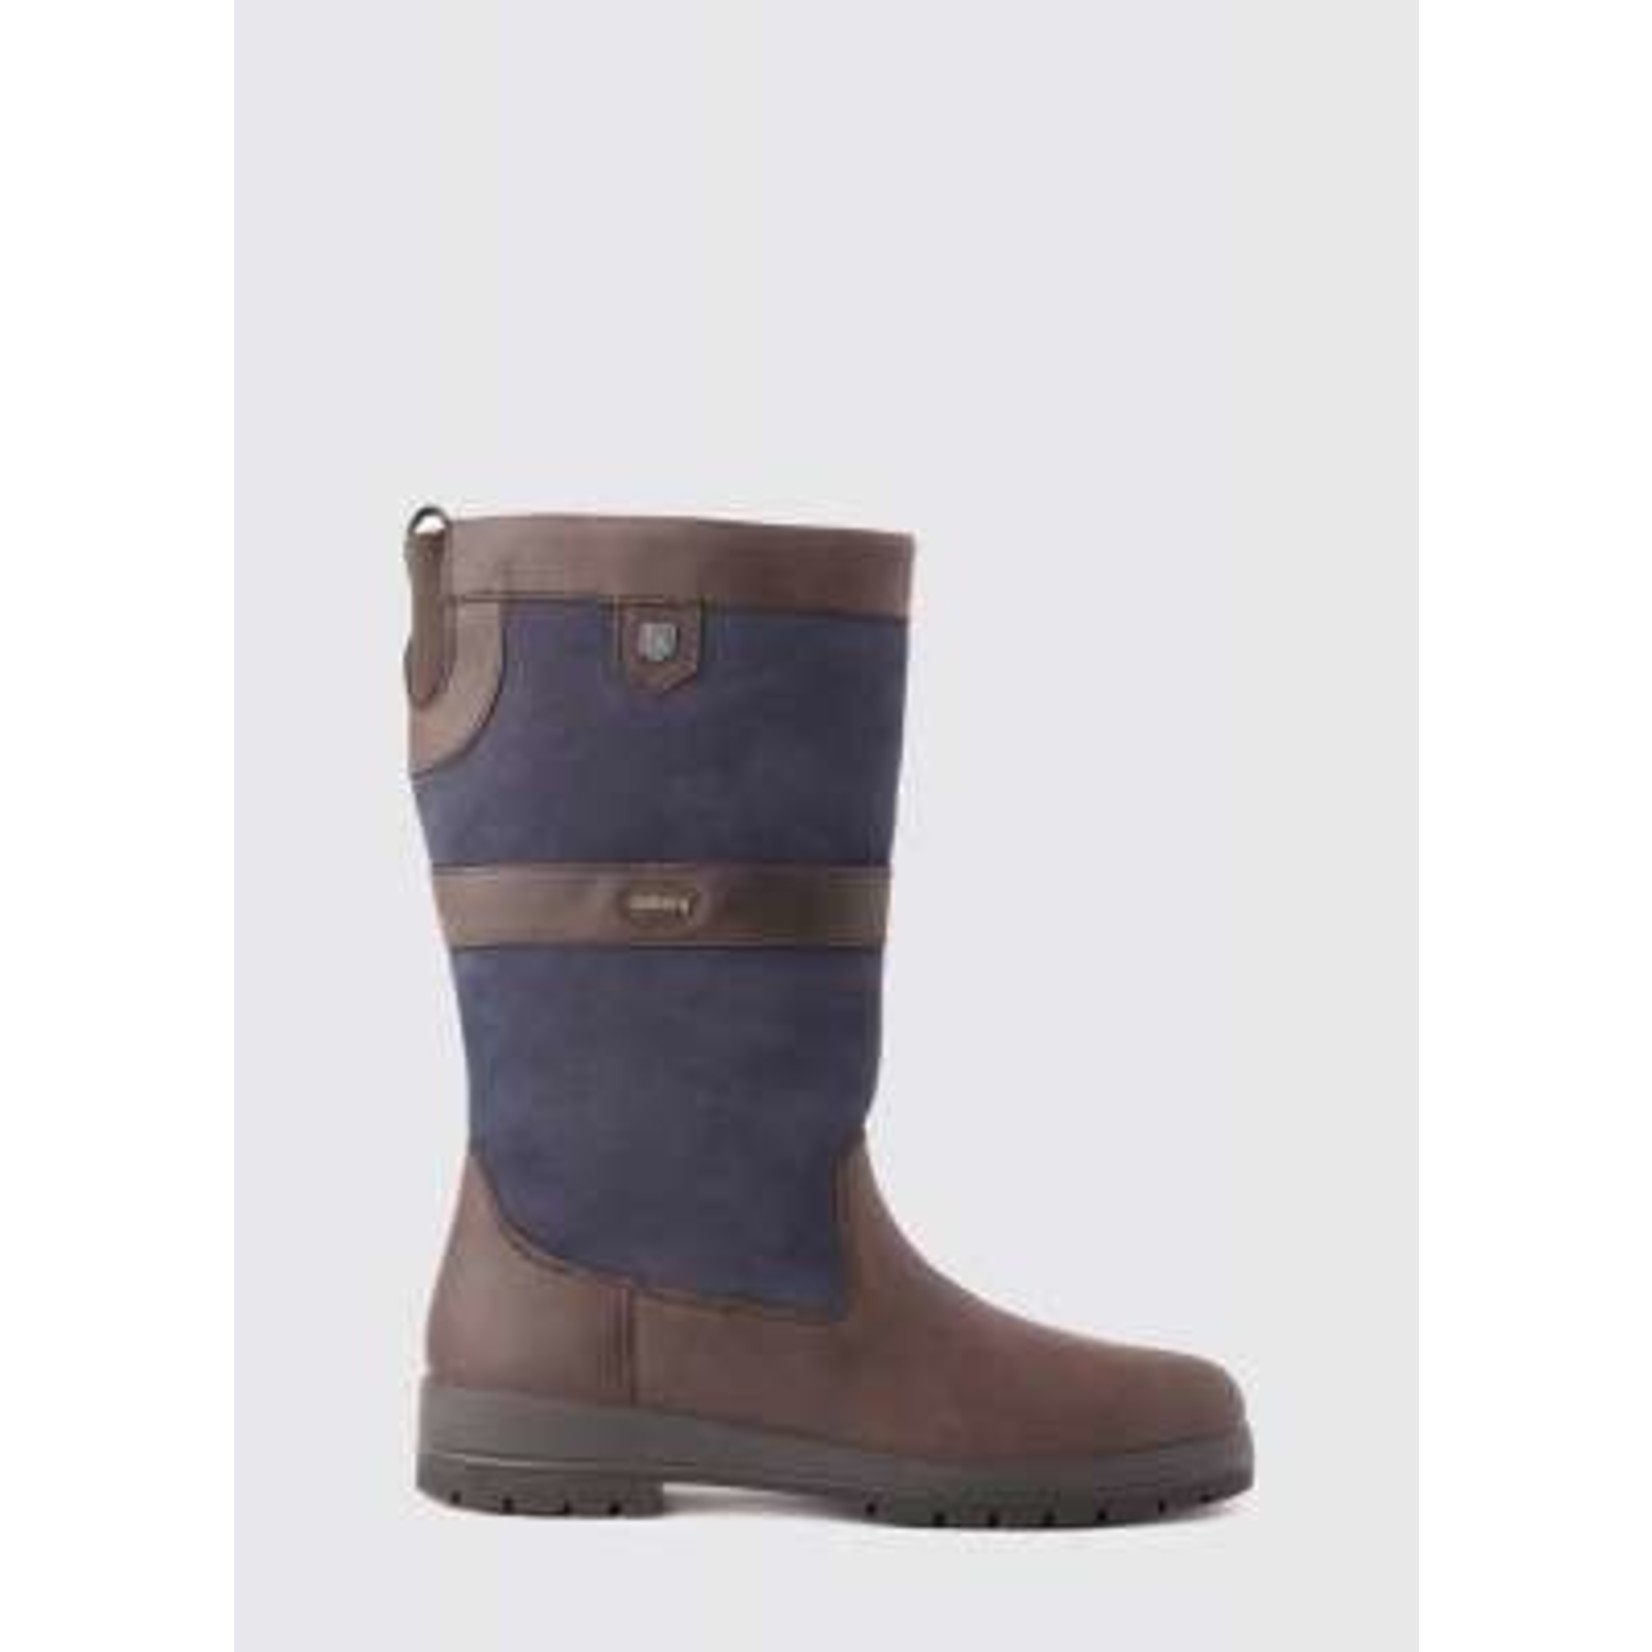 Dubarry of Ireland Kildare Country Boot in Navy/Brown